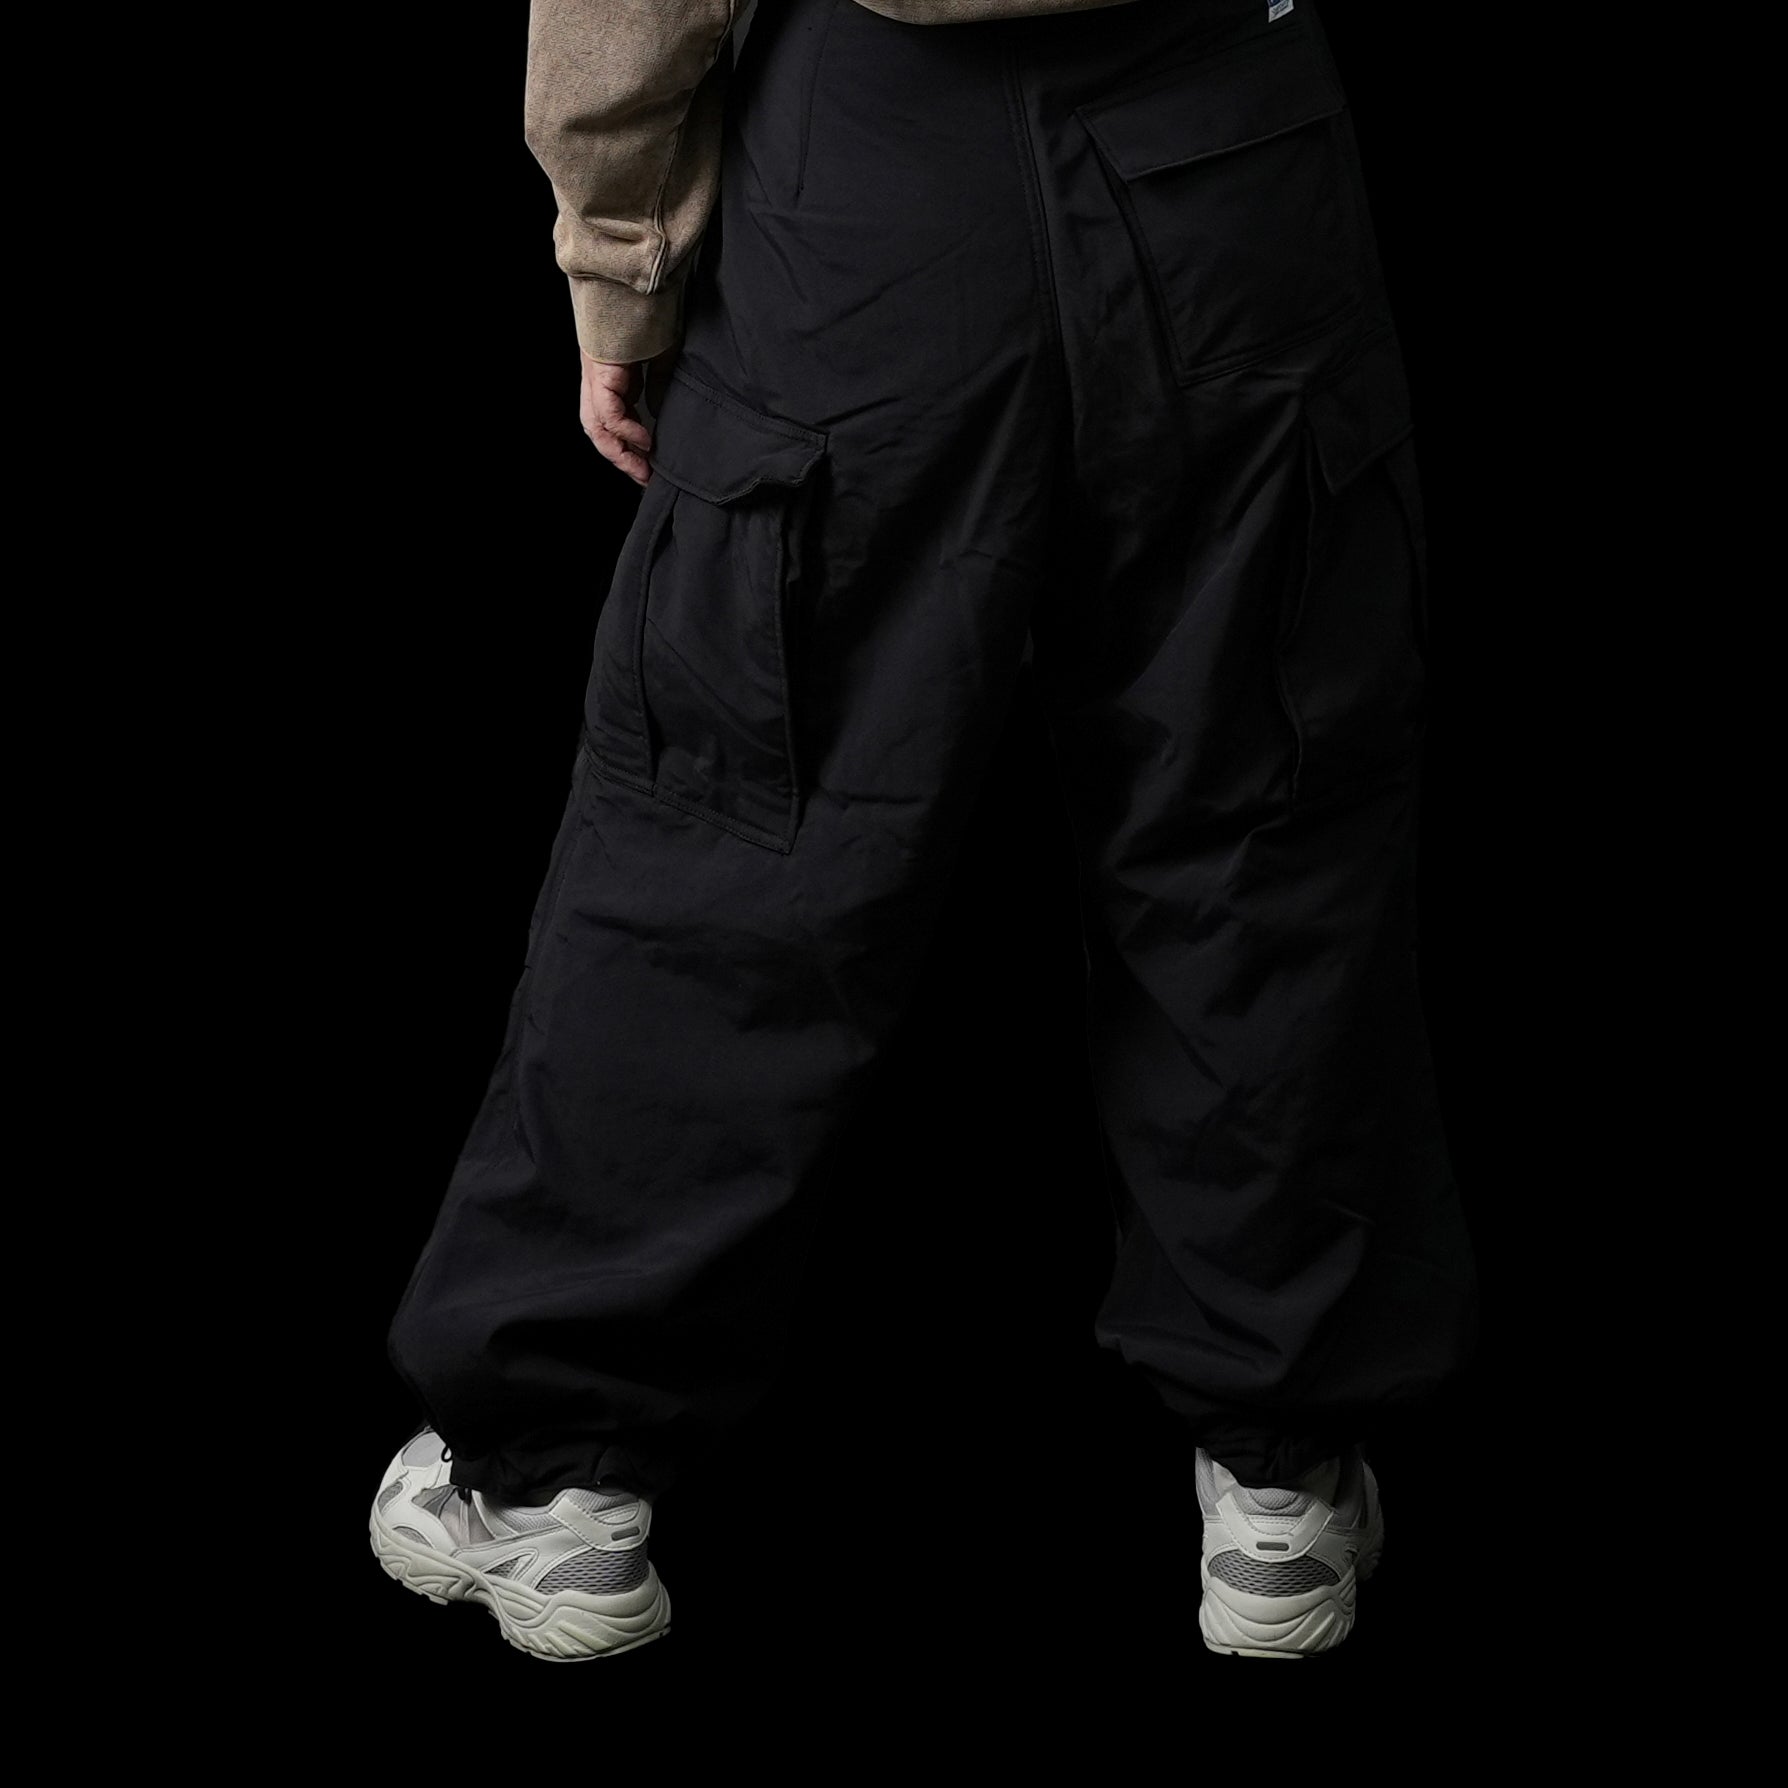 No:AM-2355005 | Name:Nylon Duck Cargo Pants | Color:Brown/Black【ARMYTWILL_アーミーツイル】